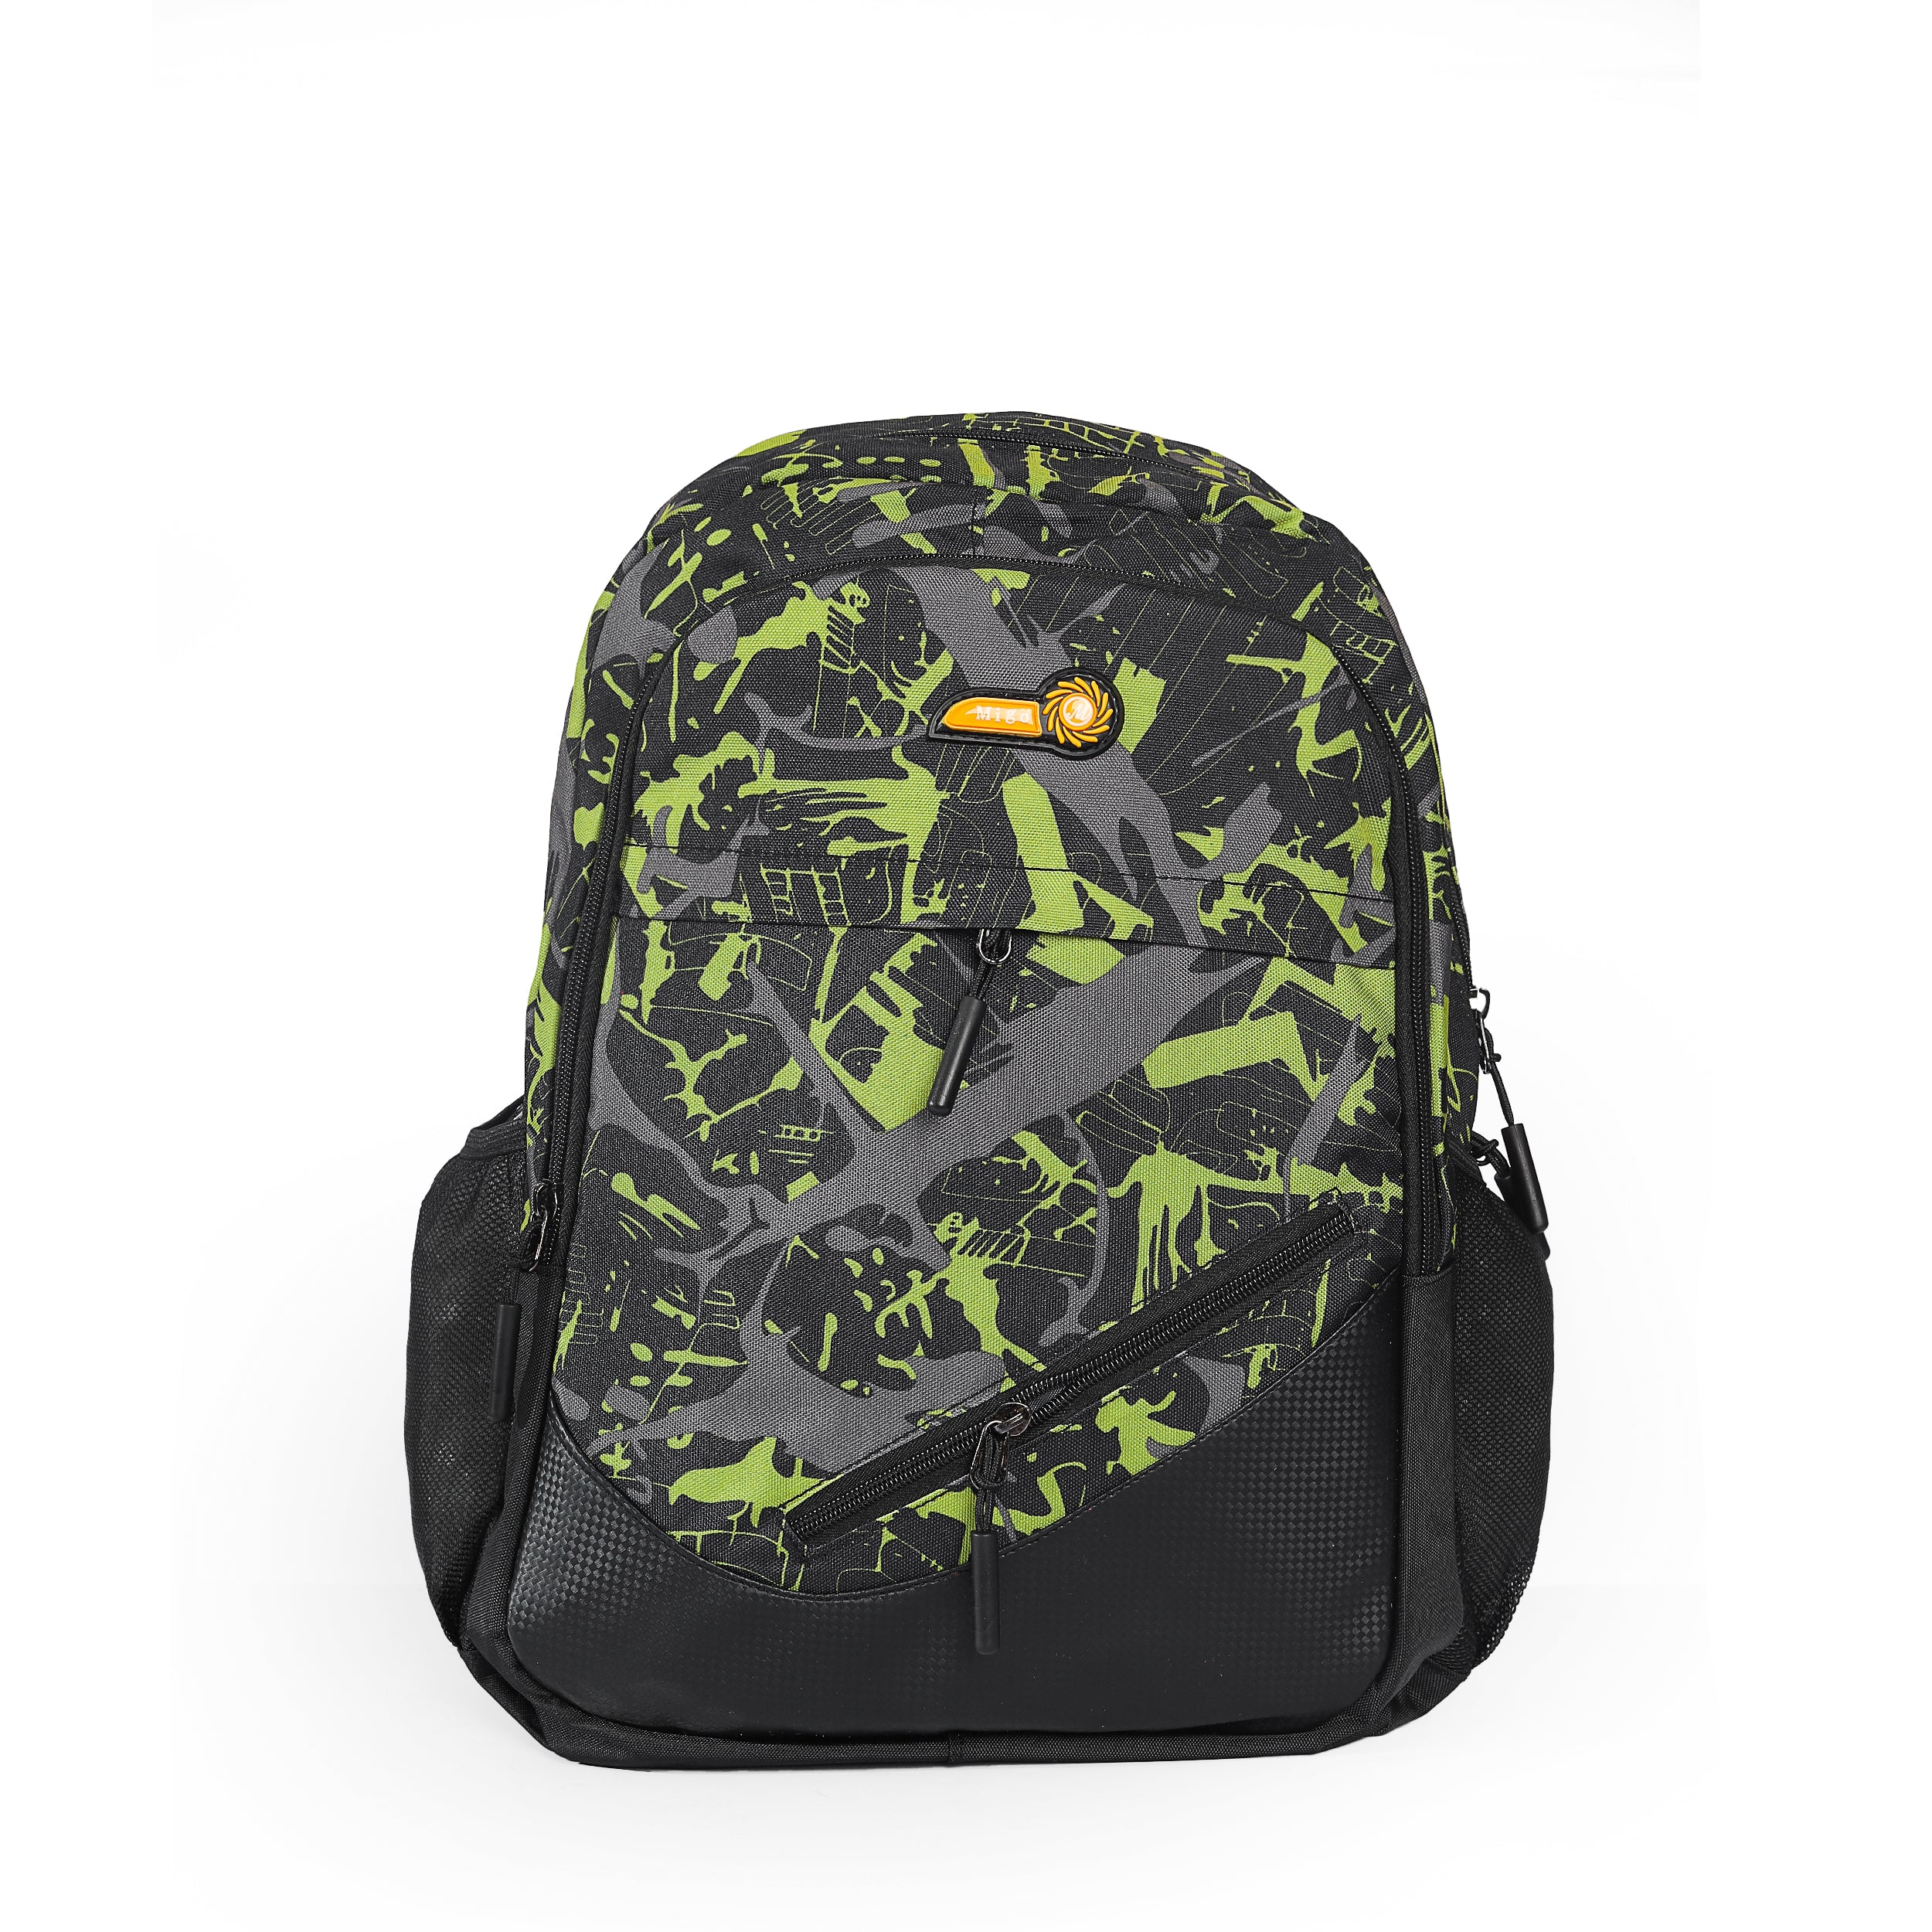 Colorful School Bag For Teens 16 INCH